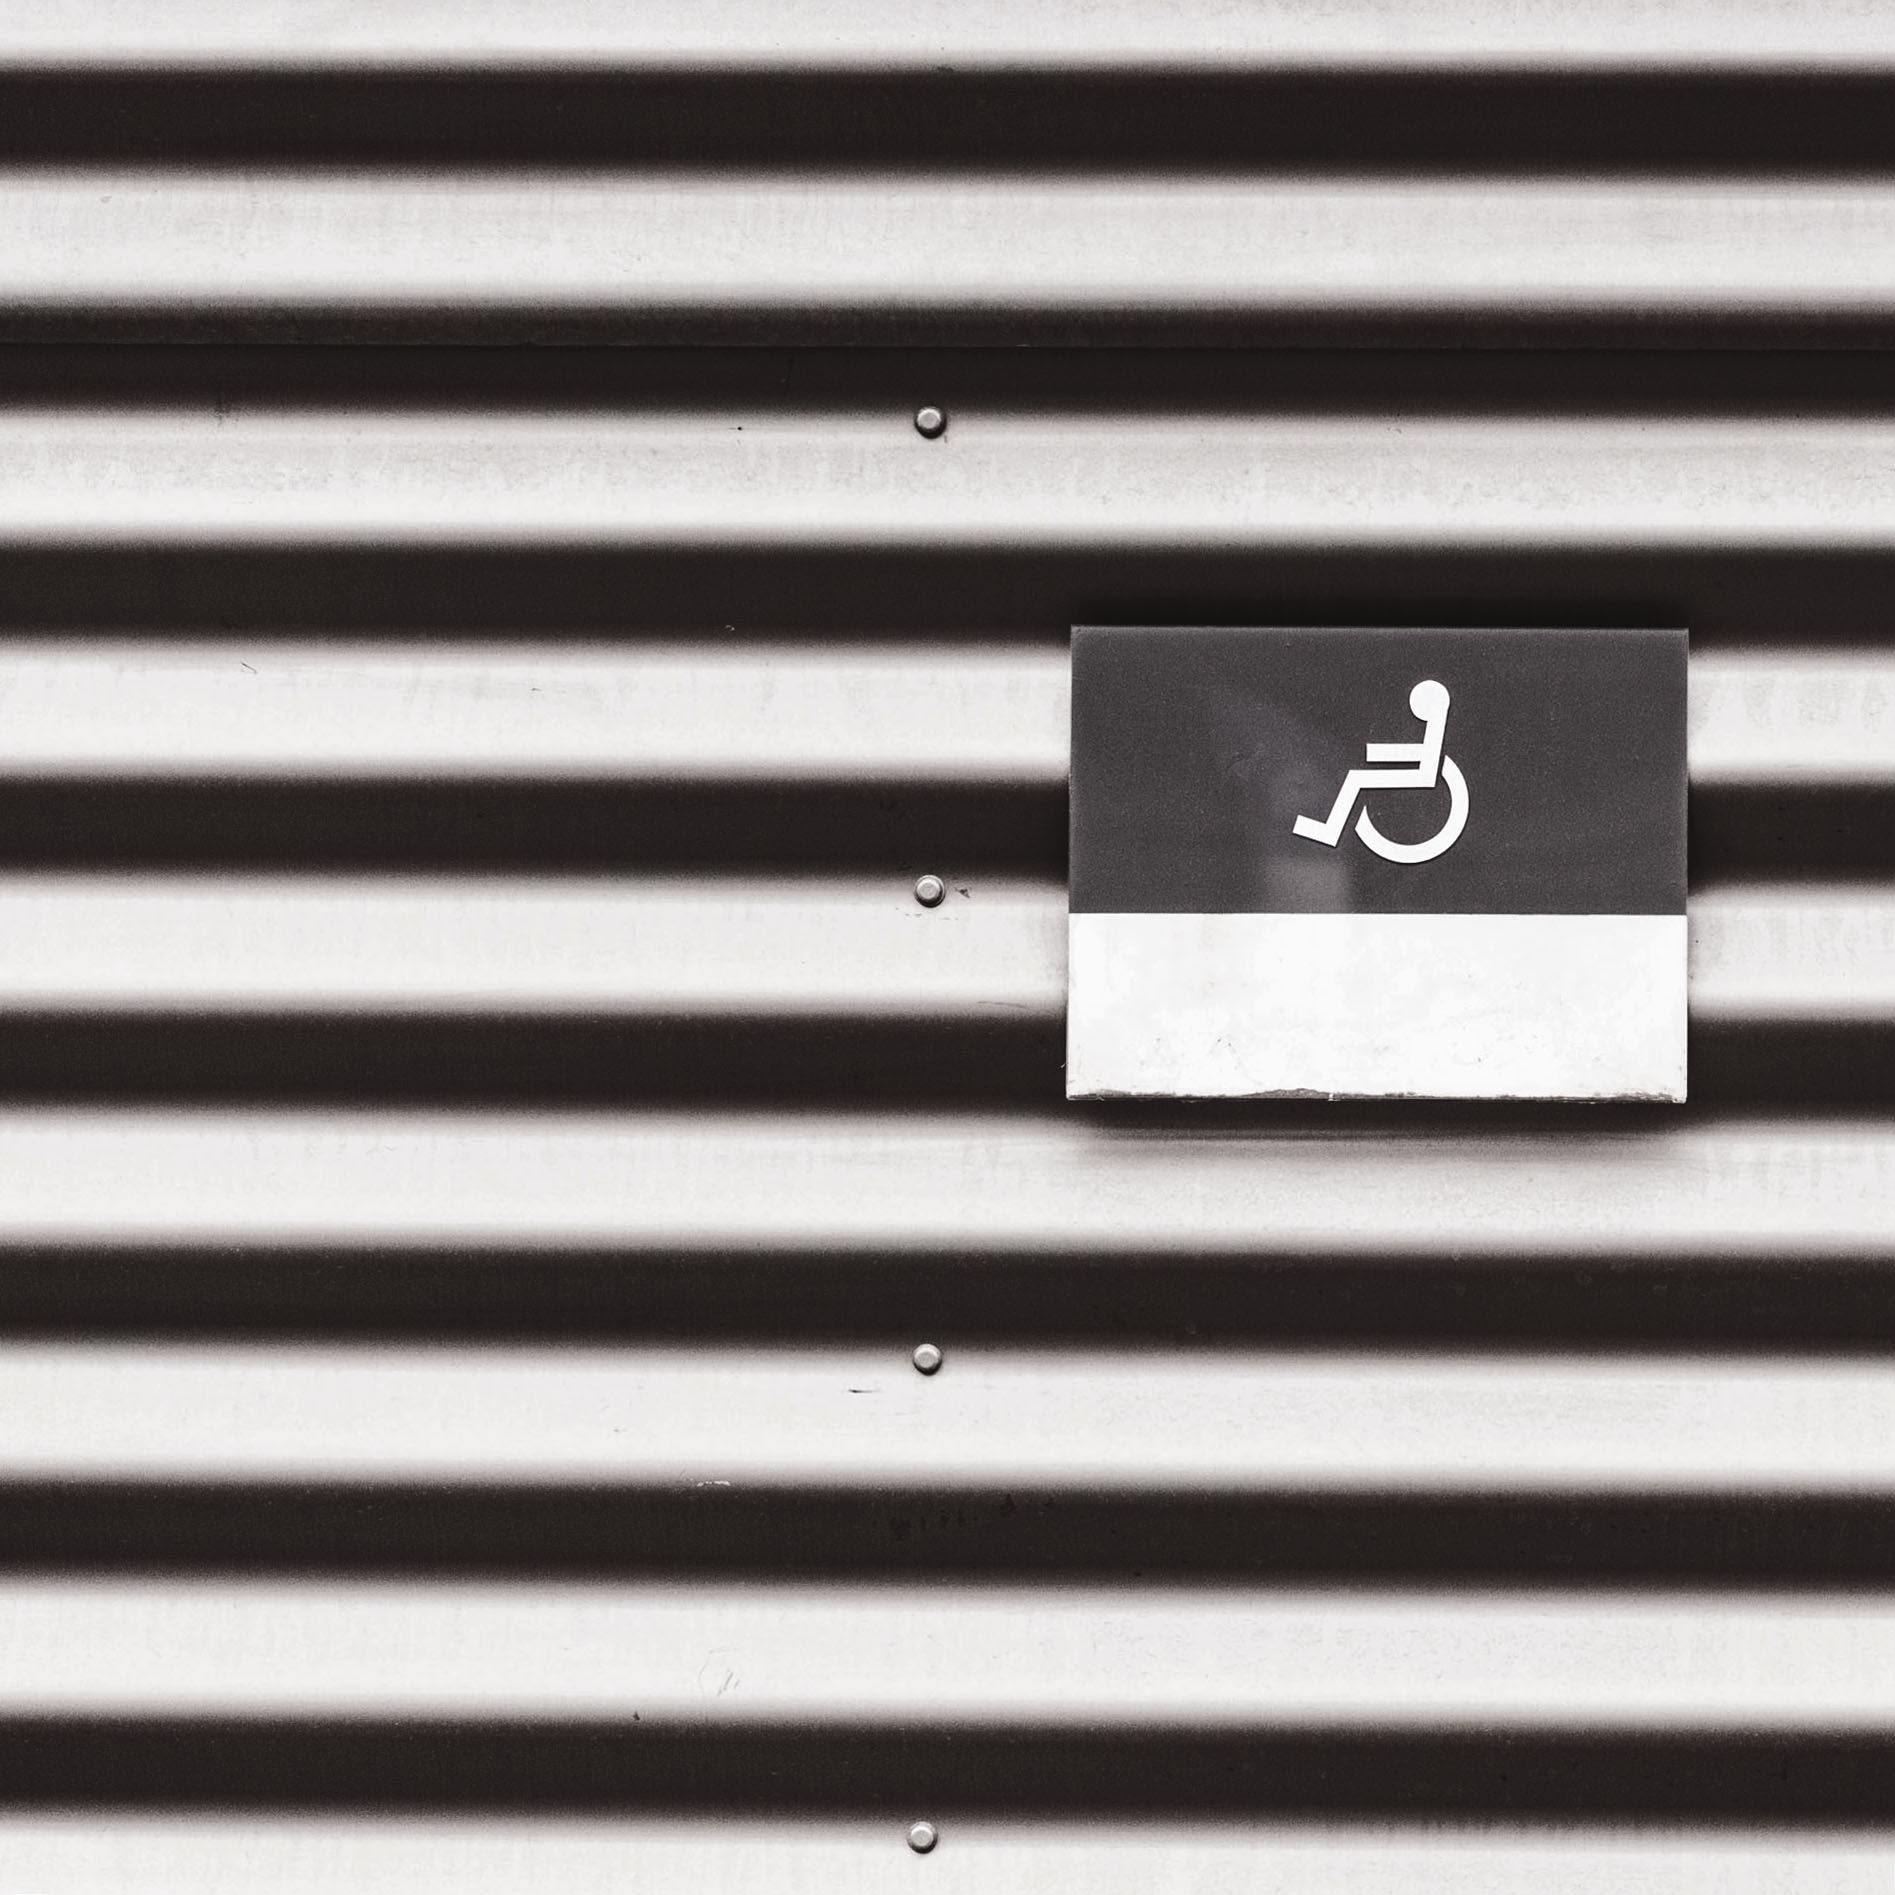 metal-wall-with-wheelchair-disabled-sign-picjumbo-com.jpg